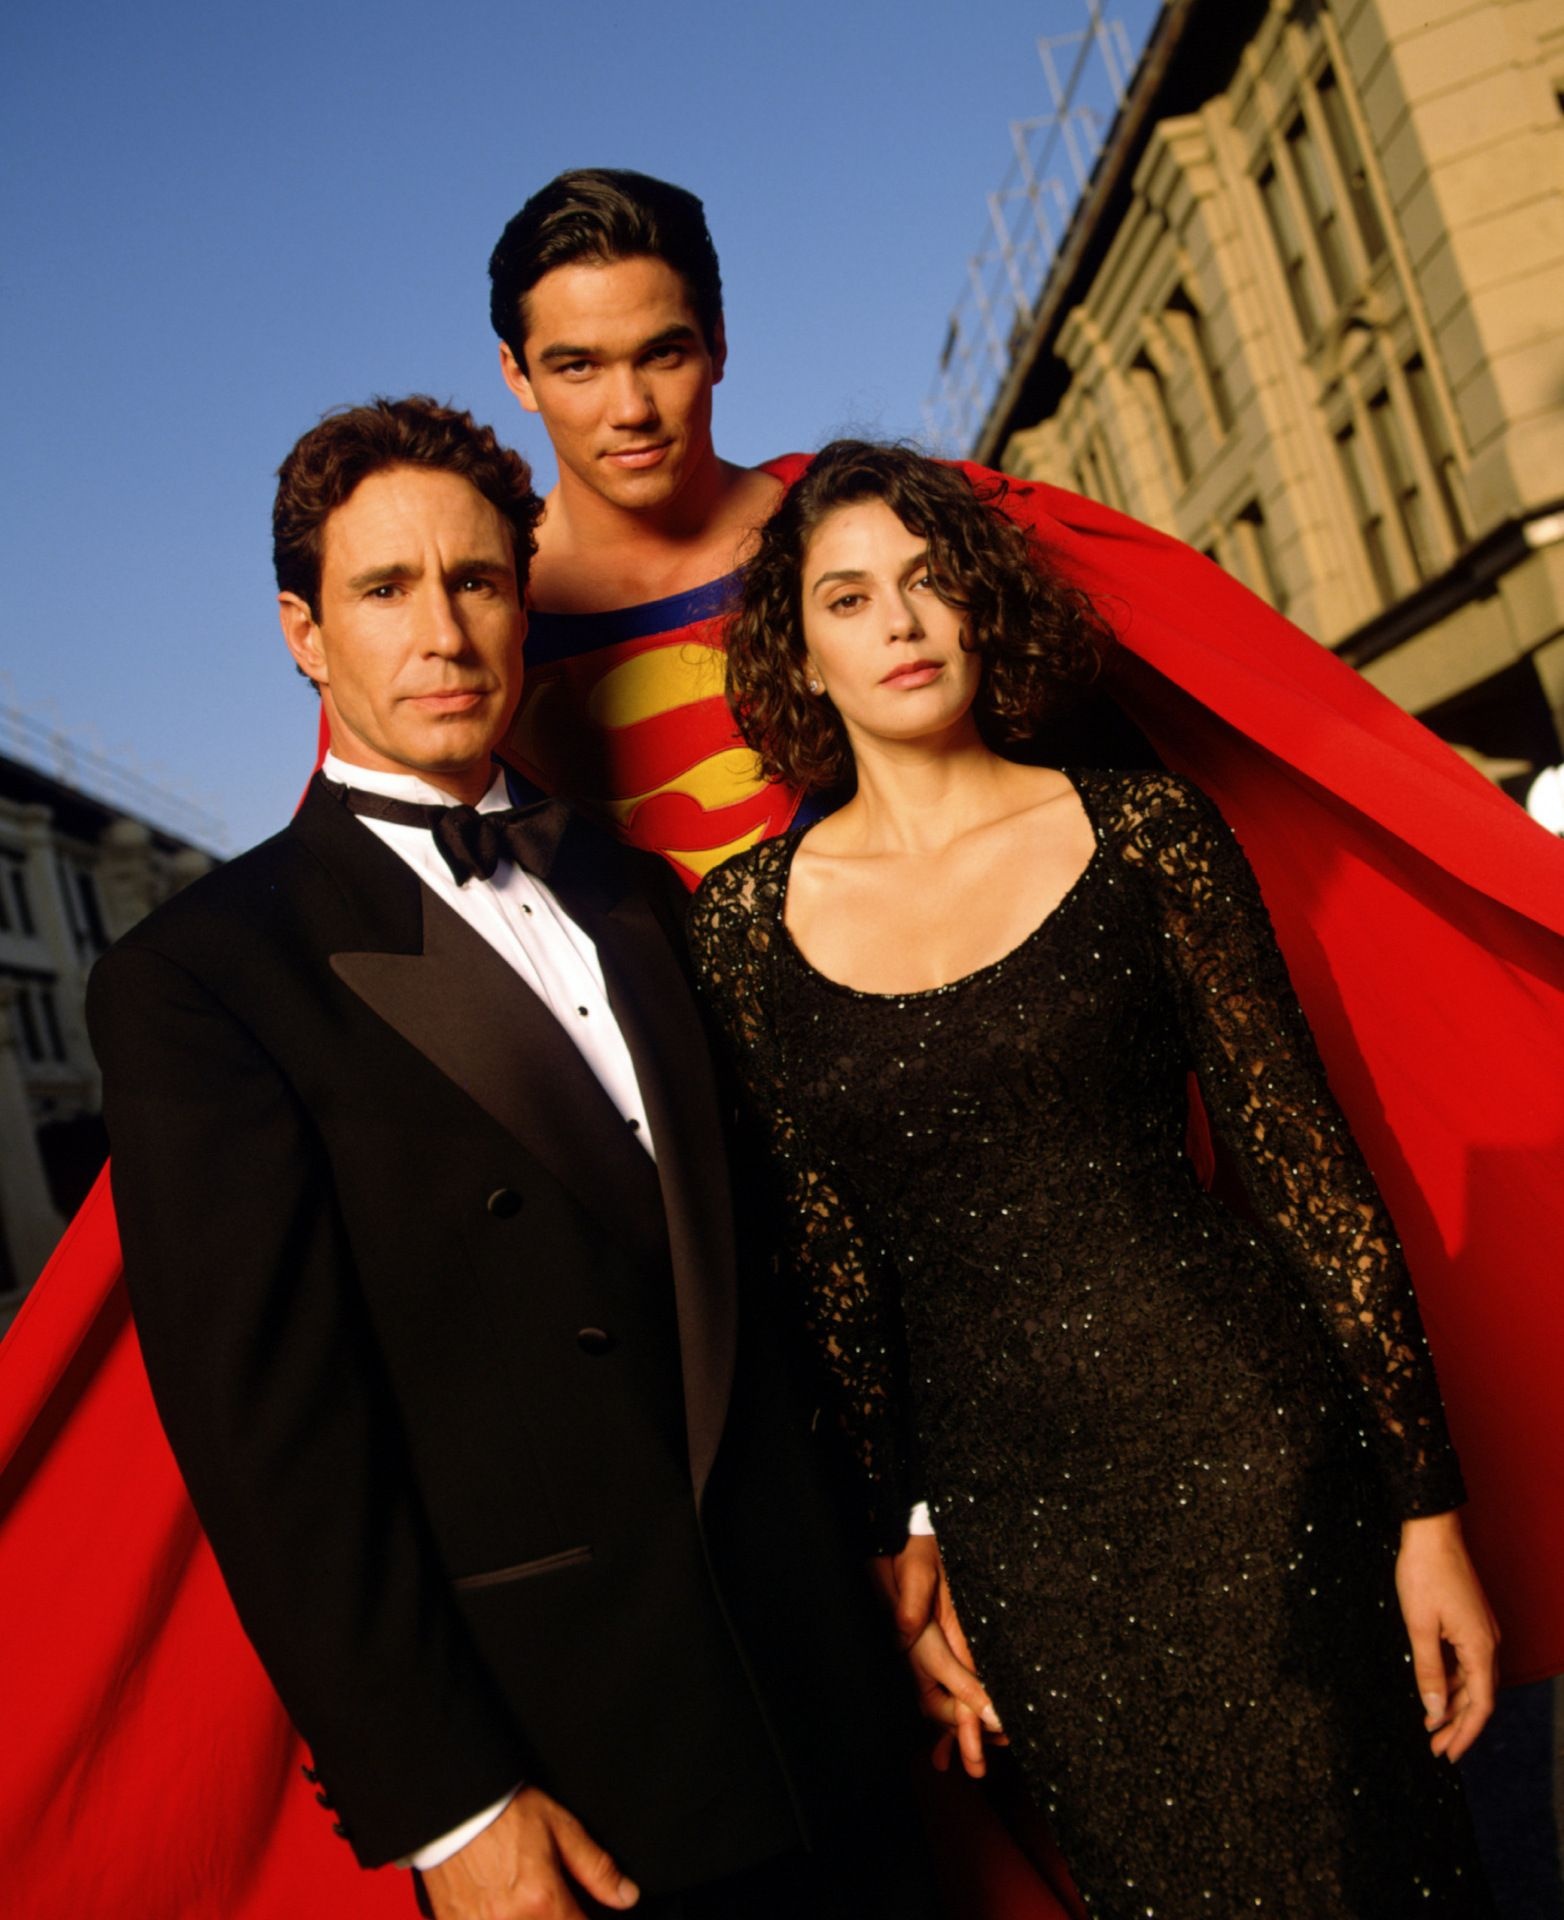 Lois and Clark: The New Adventures of Superman: John Shea as Lex Luthor, A supervillain and ex-fiance of Terry Hatcher's character. 1570x1920 HD Background.